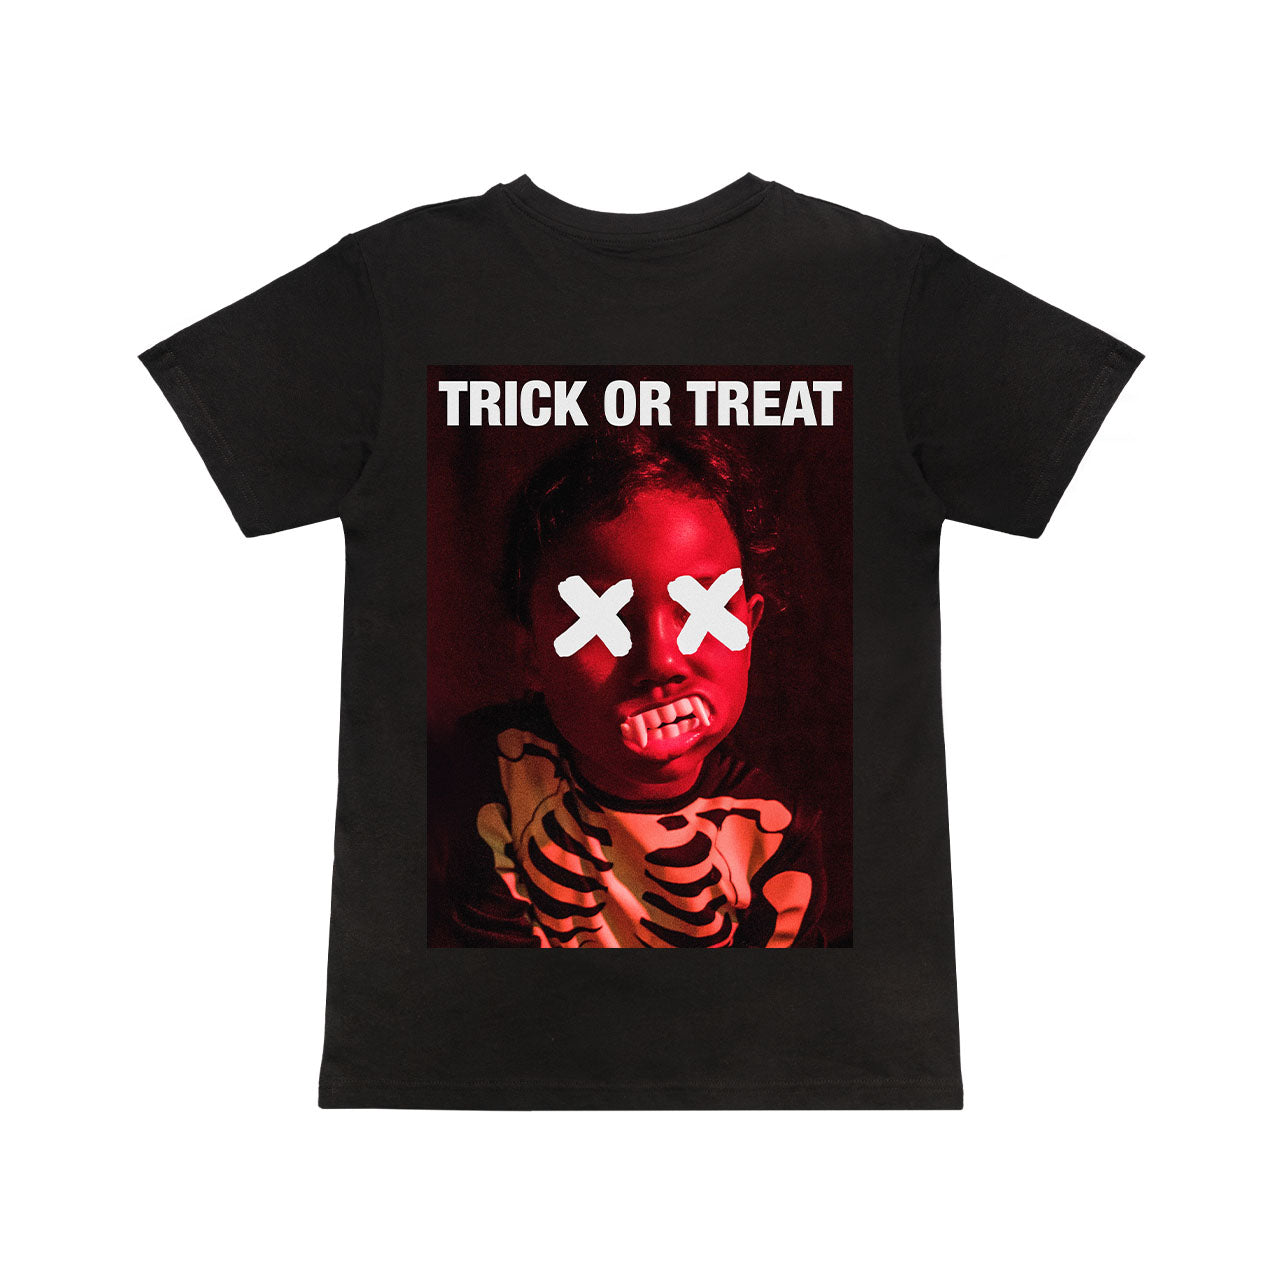 Snash - Trick or Treat T-Shirt